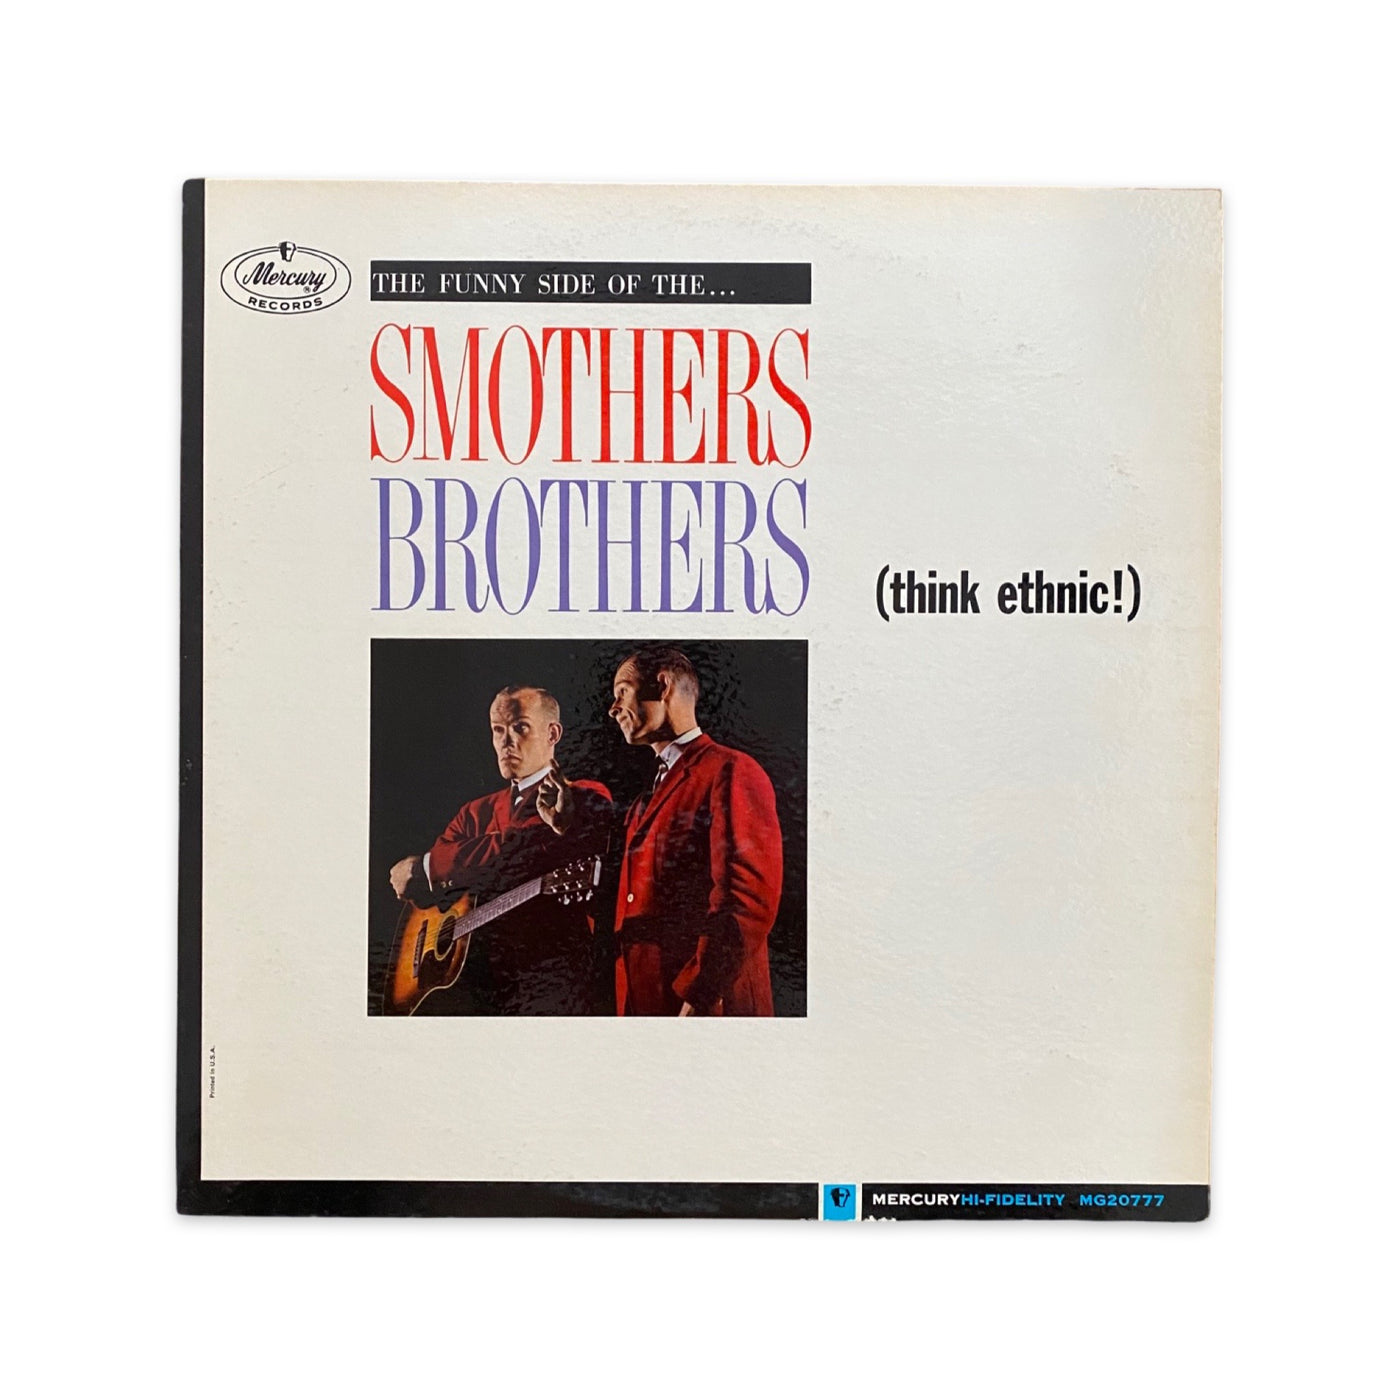 Smothers Brothers - (Think Ethnic!)